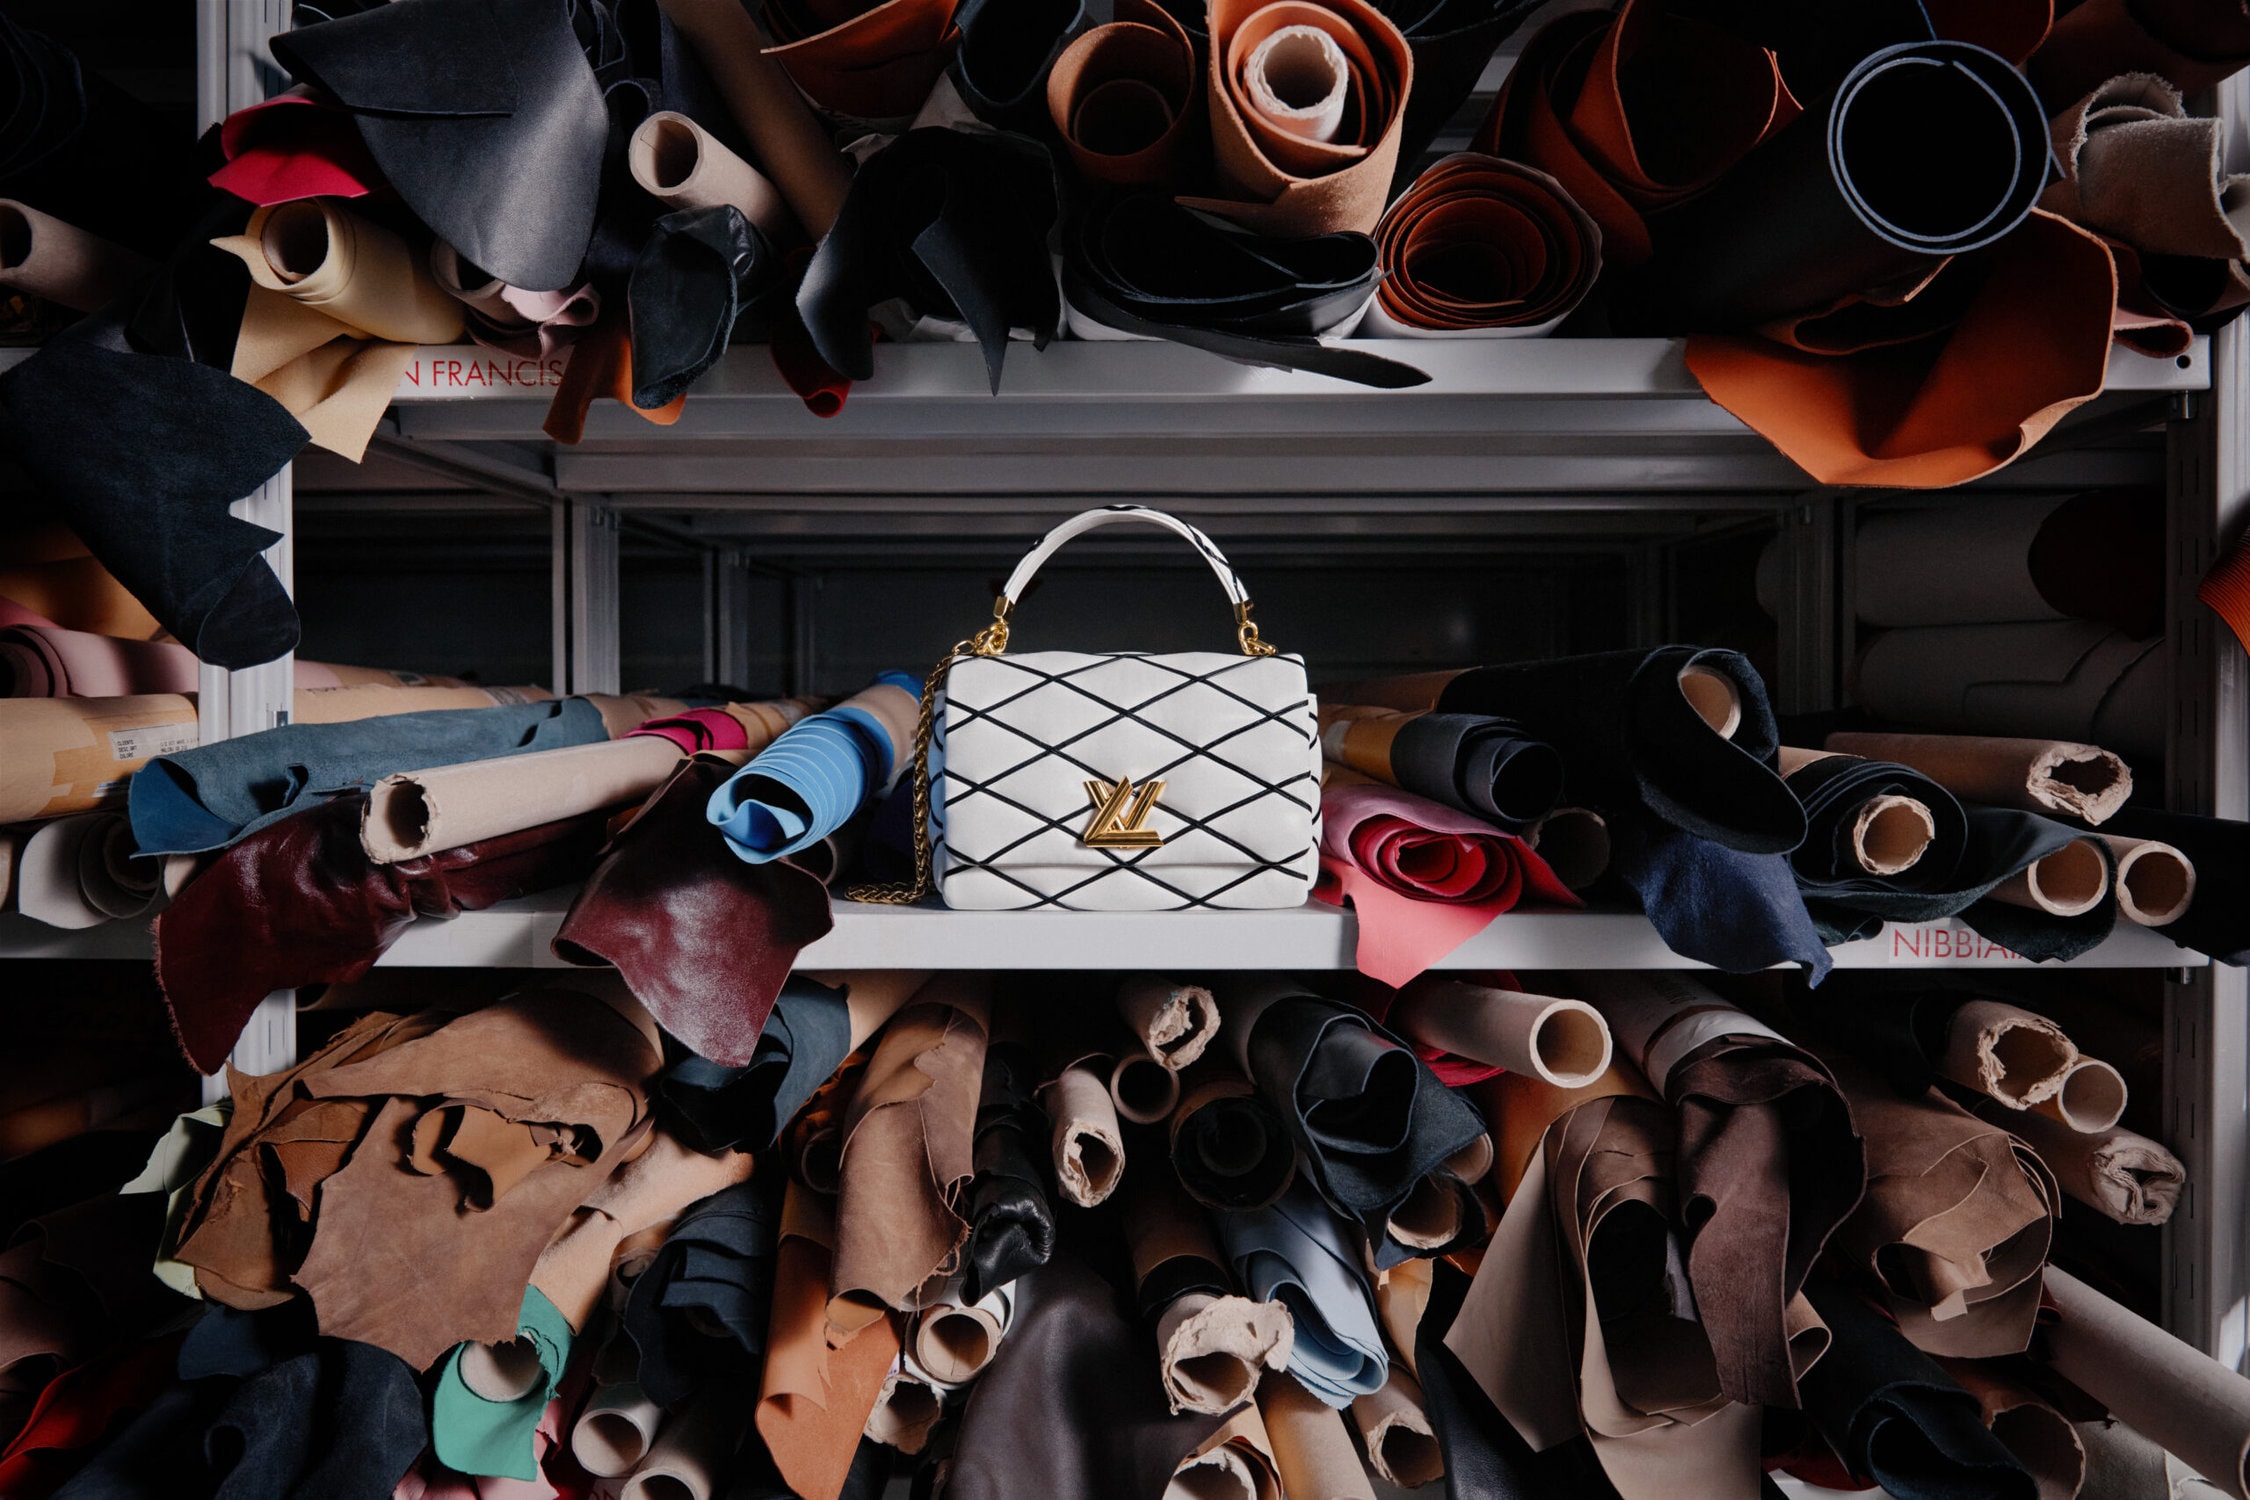 LOUIS VUITTON: The new iconic bag model GO-14 - THE Stylemate